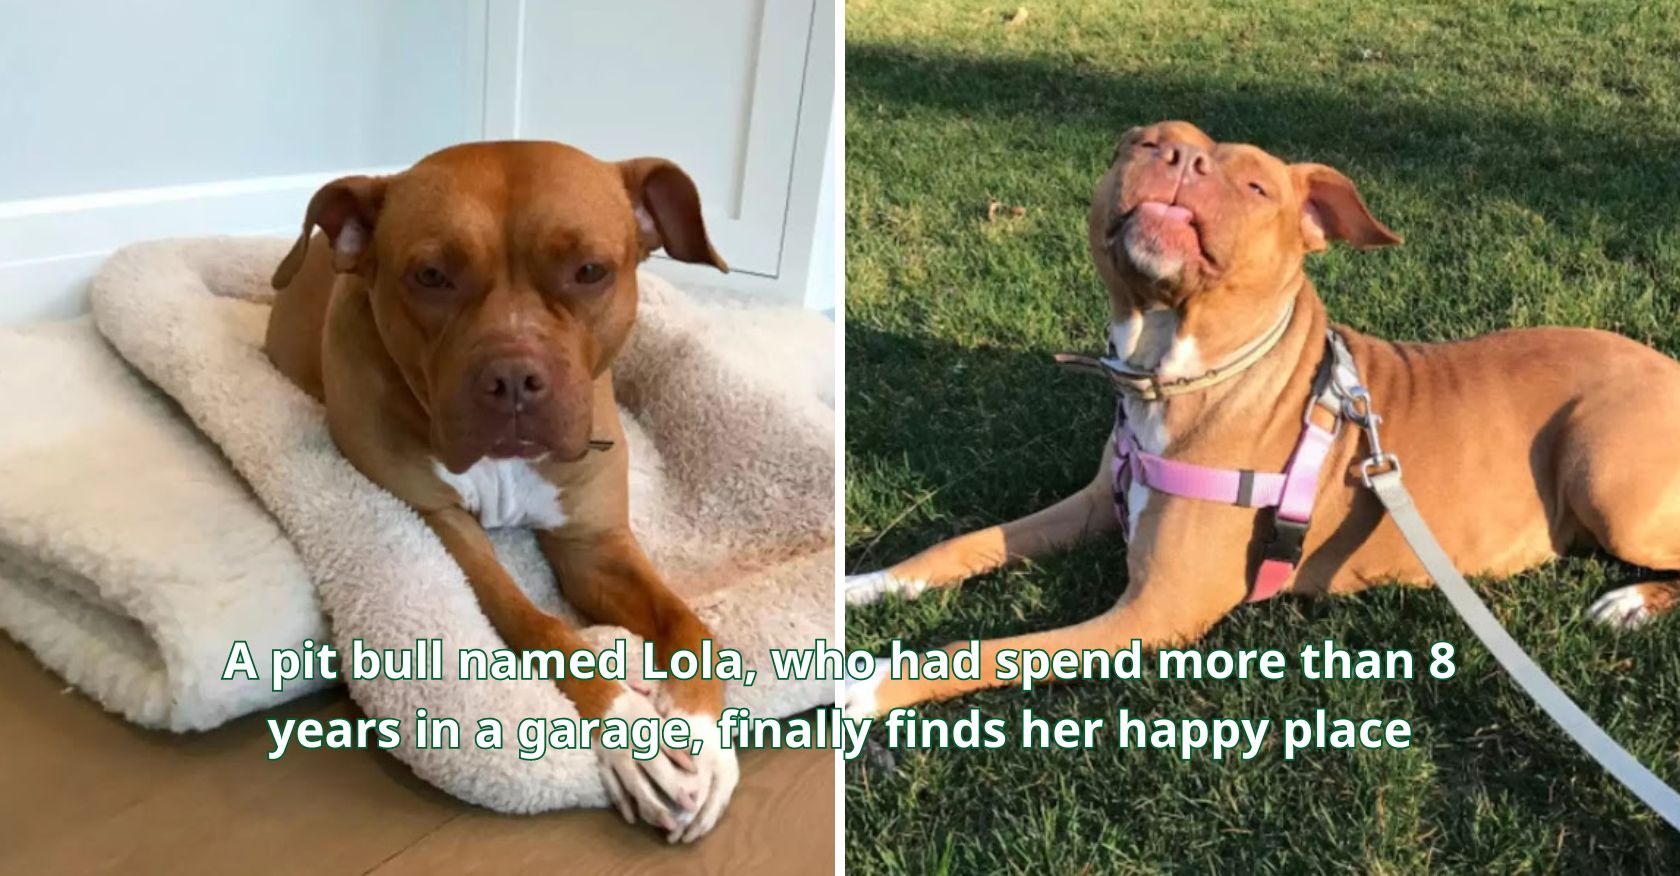 A pit bull named Lola, who had spend more than 8 years in a garage, finally finds her happy place